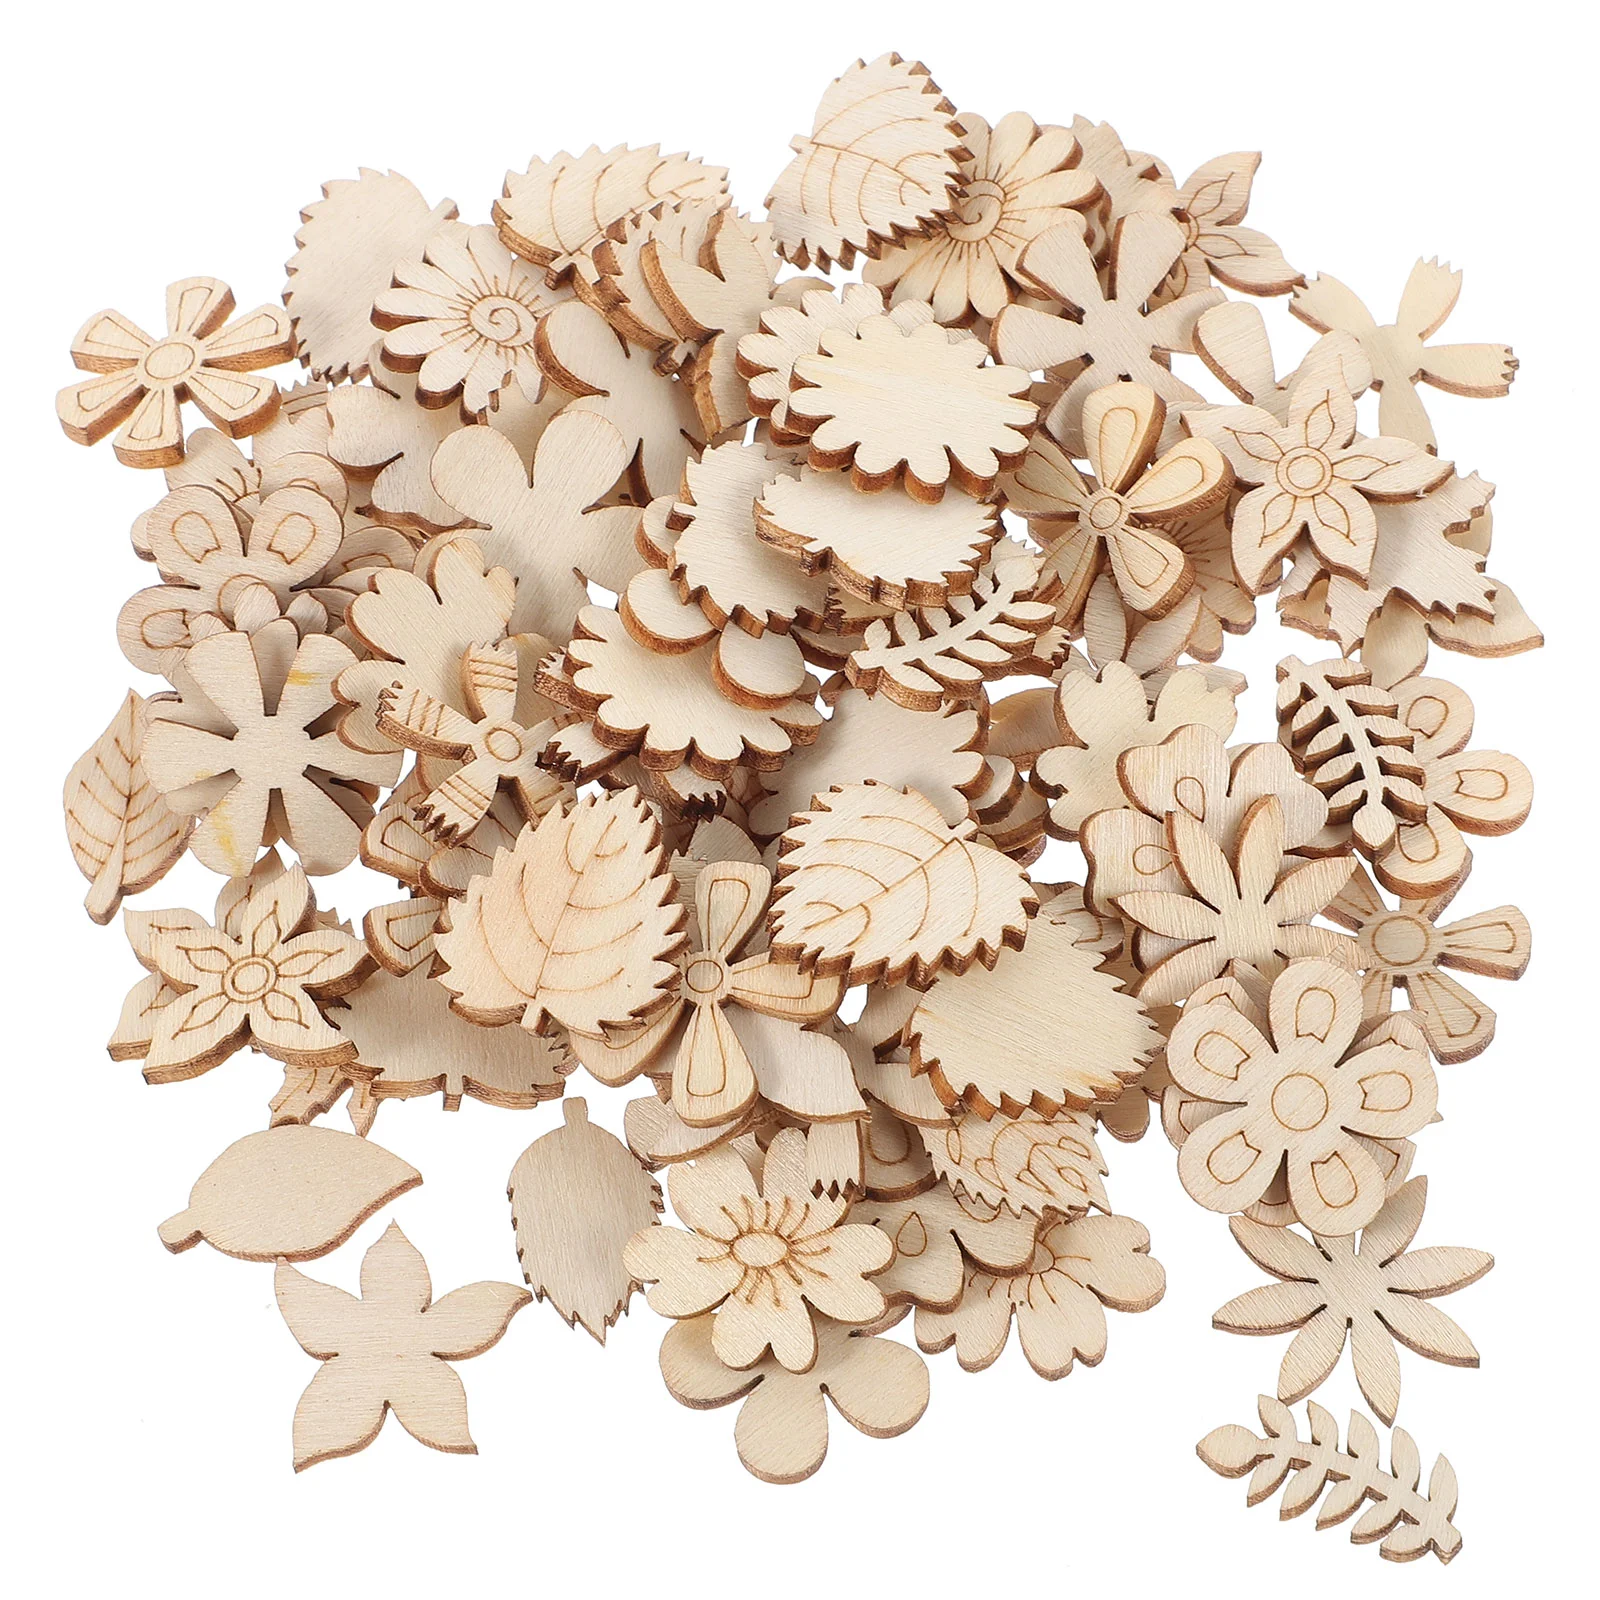 

200 Pcs DIY Graffiti Wood Chips Wooden Slices Tags Unfinished Crafts Leaves Leaf Cutouts Label Shapes